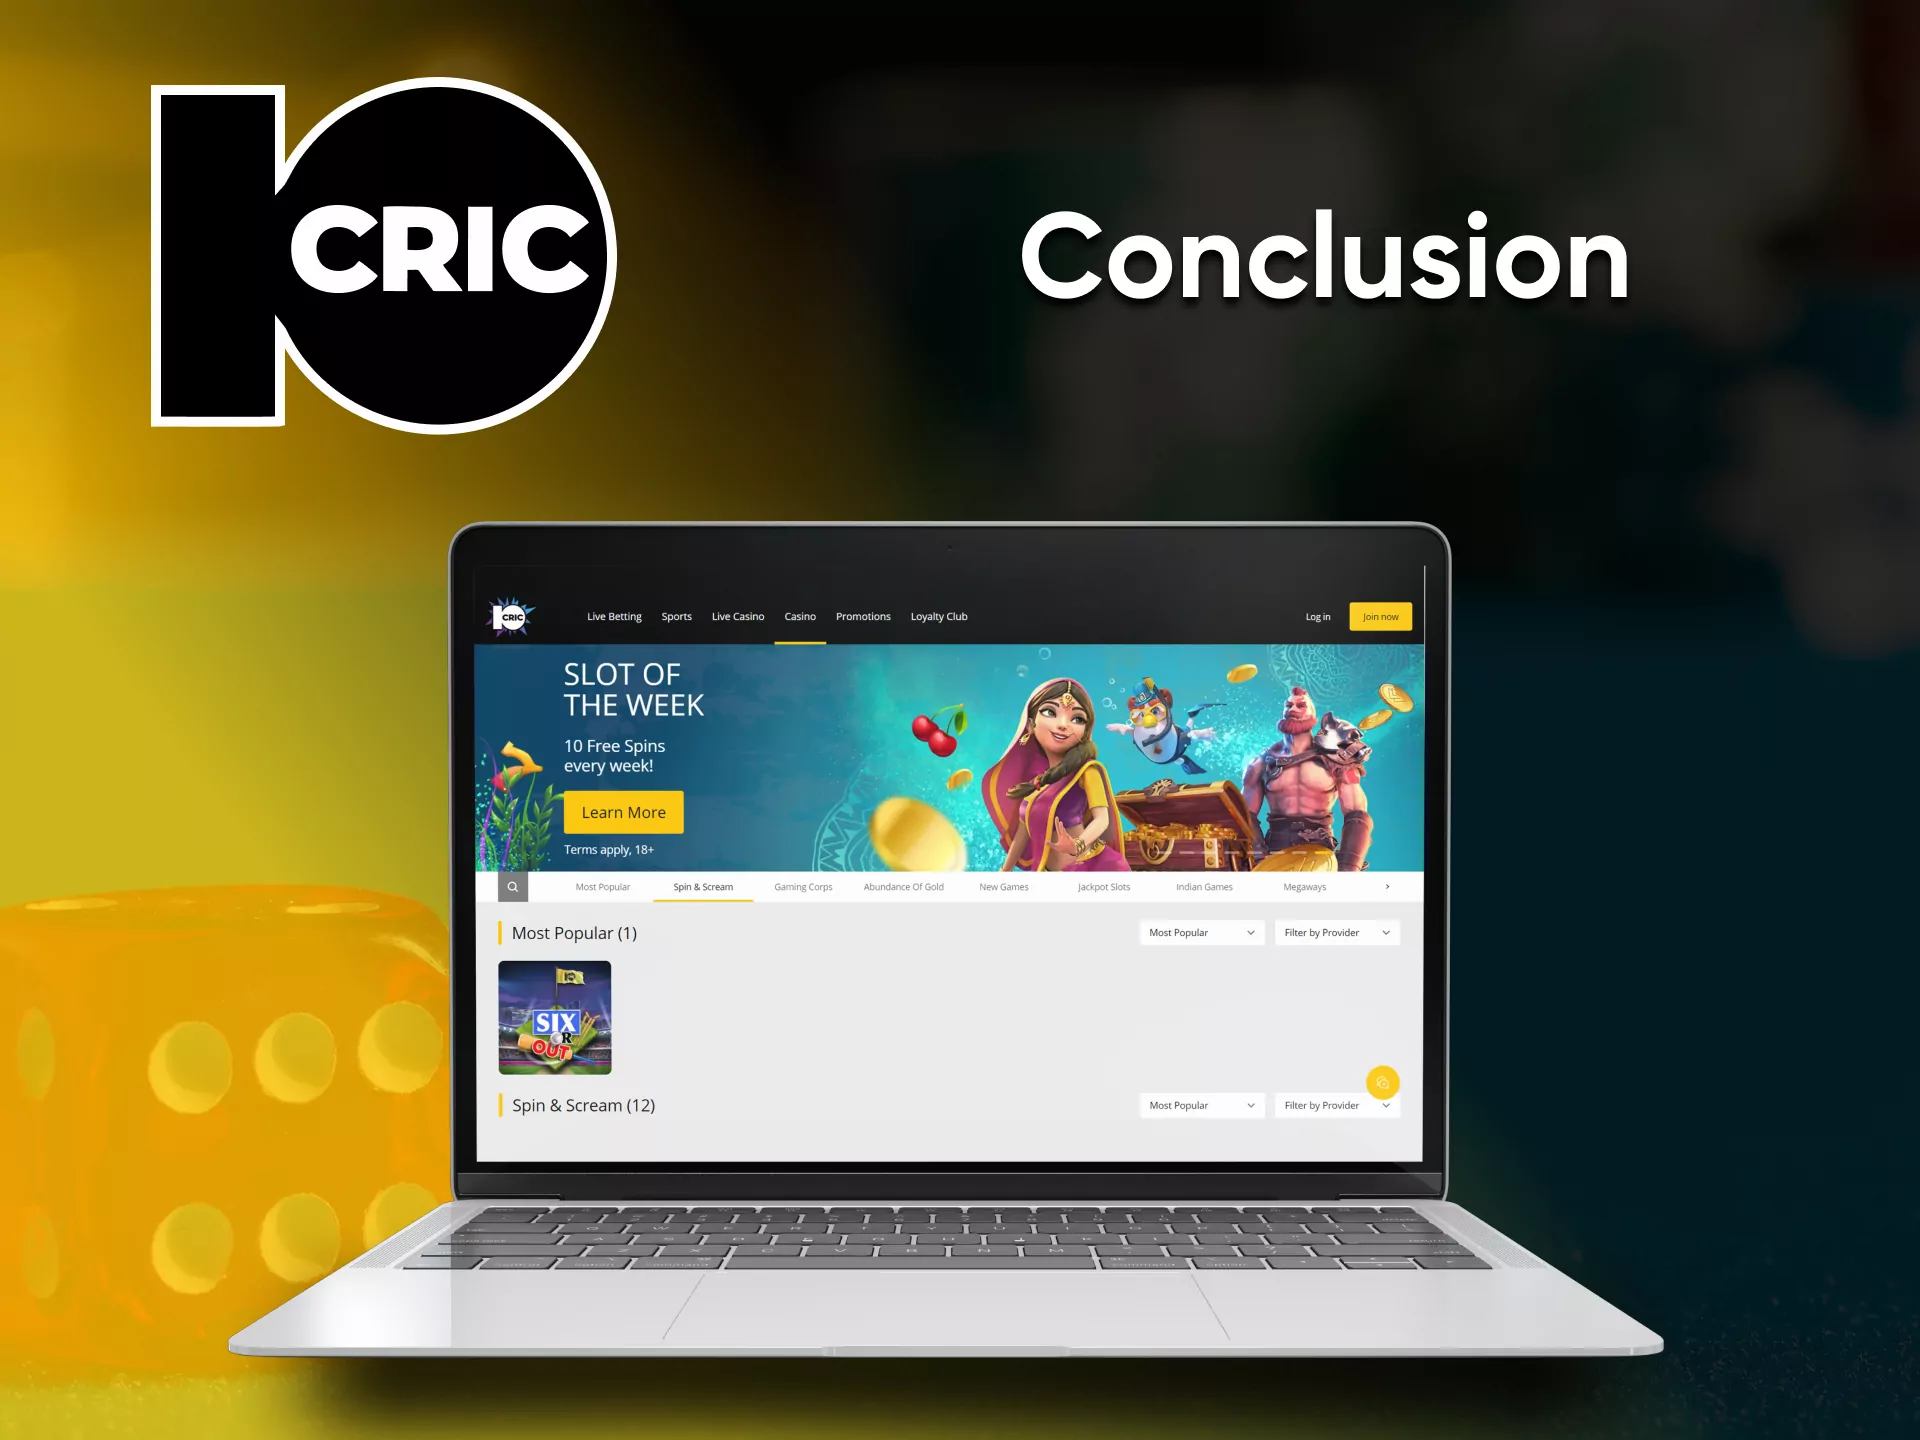 Enjoy casino games at the site from 10cric.